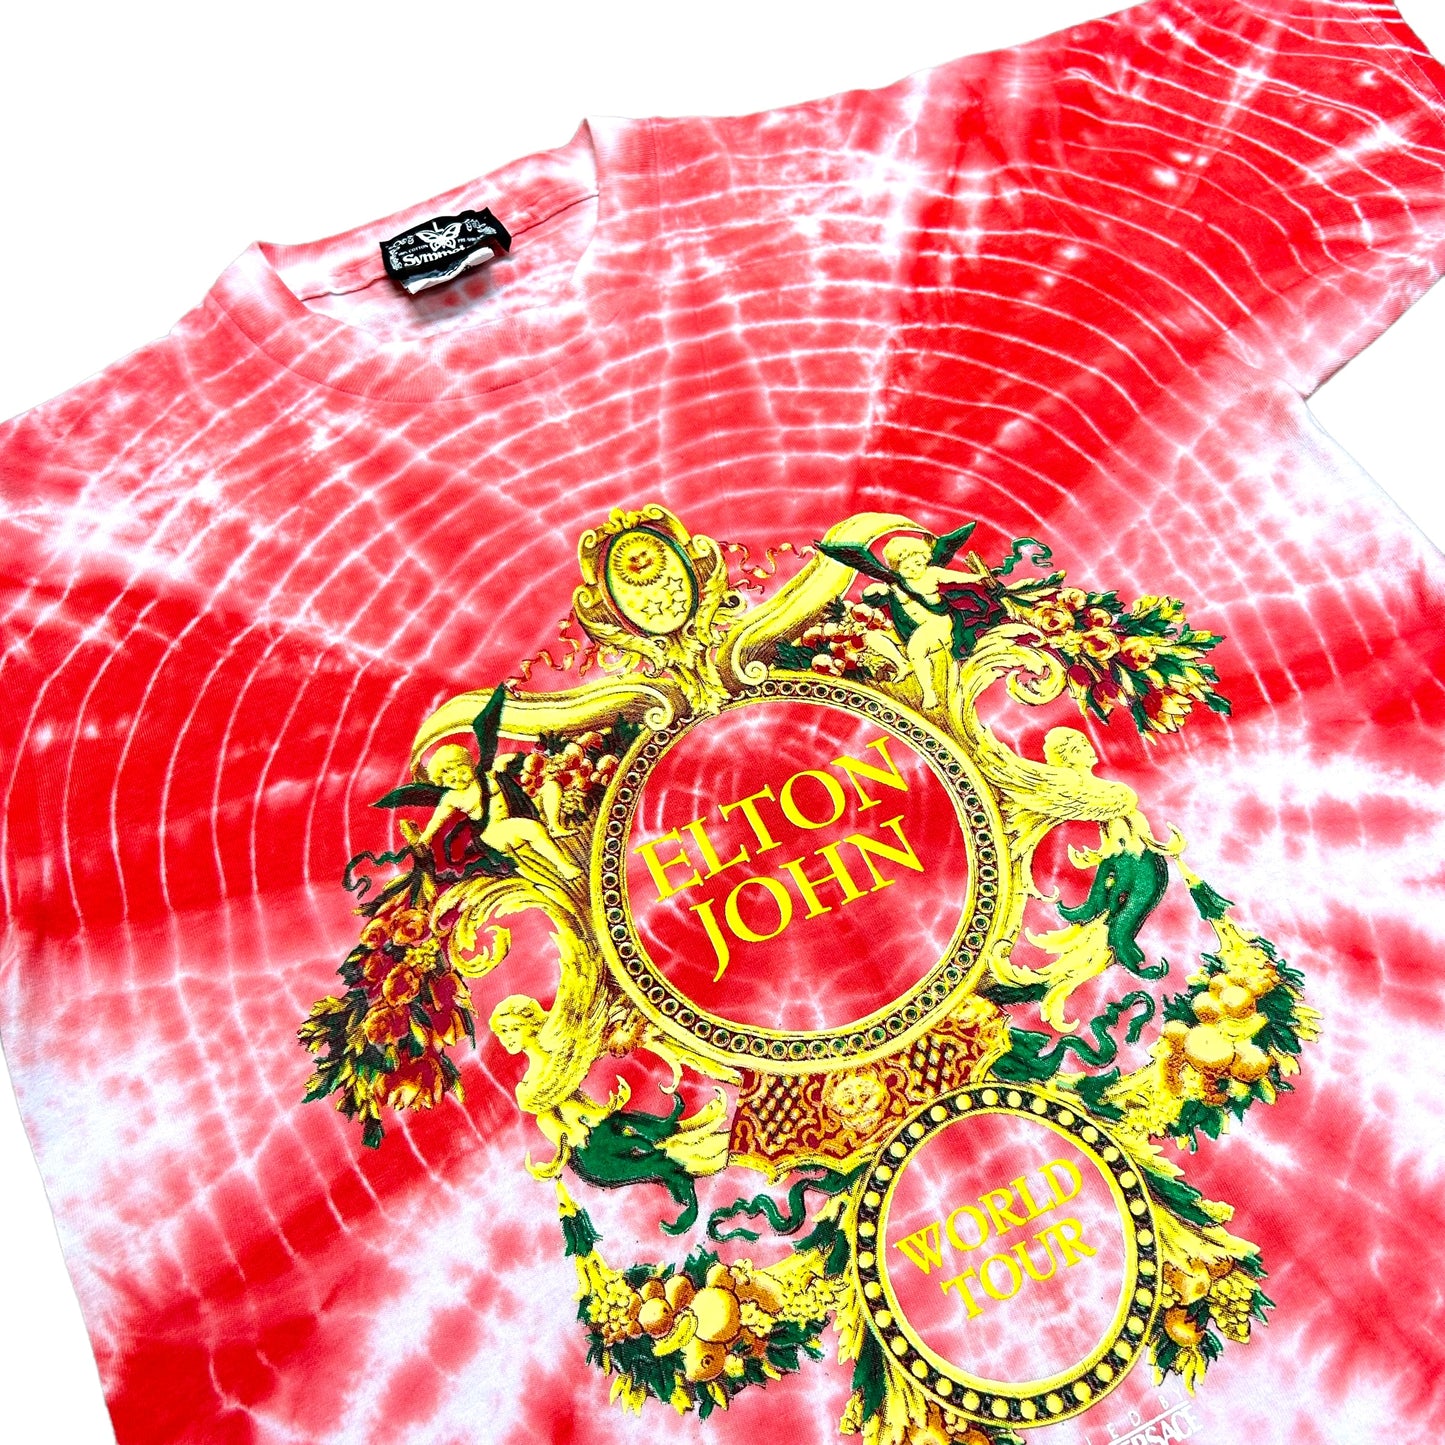 Vintage 1990s Elton John World Tour Styled By Versace Red Tie-Dye Graphic T-Shirt - Size Large